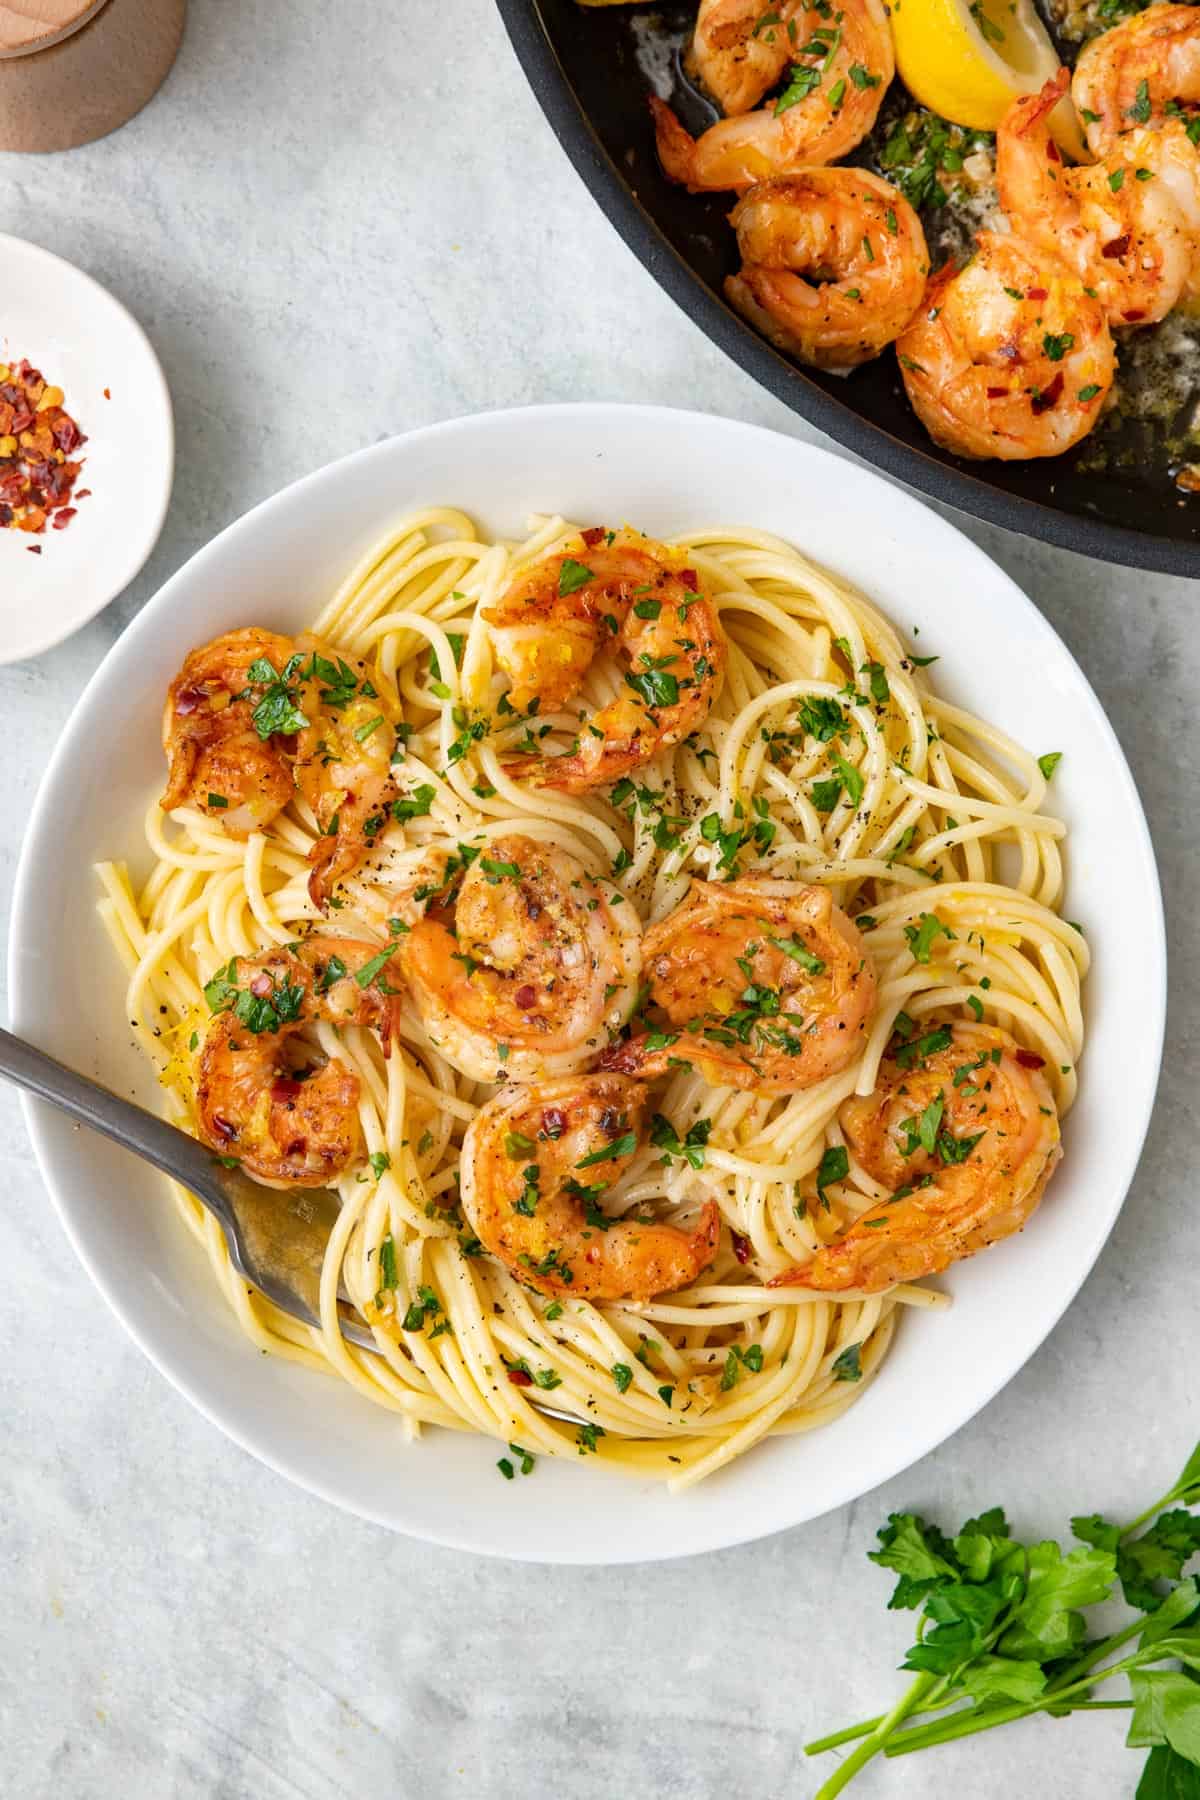 Garlic shrimp served over pasta in a shallow bowl with a forked dipped inside and the pan of shrimp nearby.